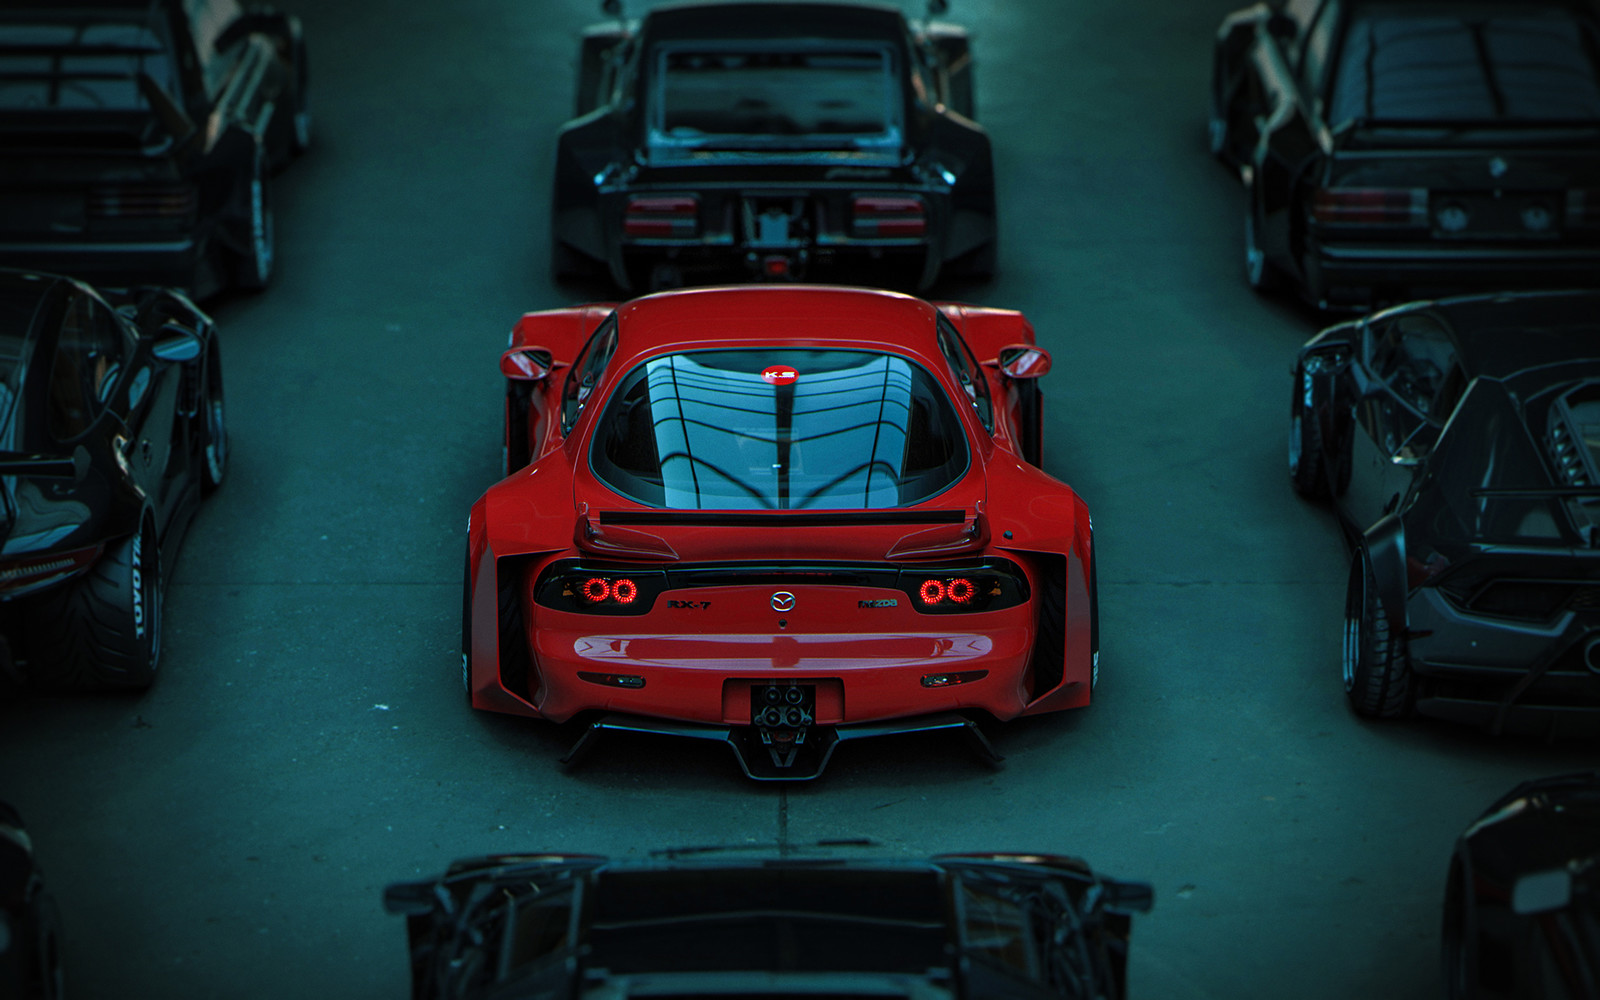 Stand Out.